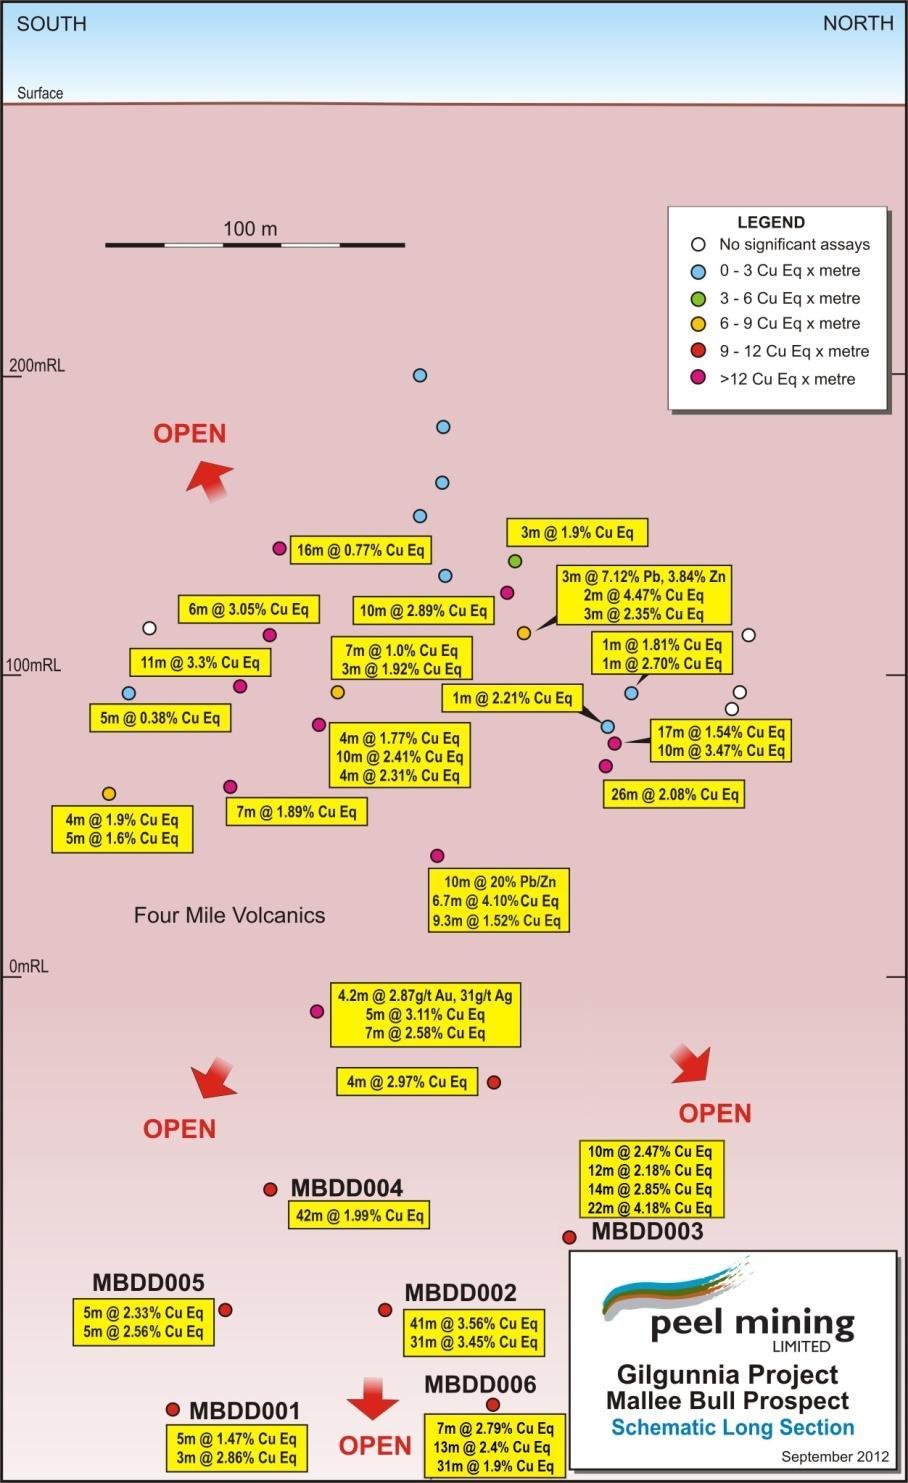 MBDD003 (140m north of MBDD001) returned a cumulative intercept of 58m at 3.15% CuEq* (2.36% Cu, 44 g/t Ag, 0.30 g/t Au, 97 g/t Co) comprising four zones of mineralisation 10m at 1.